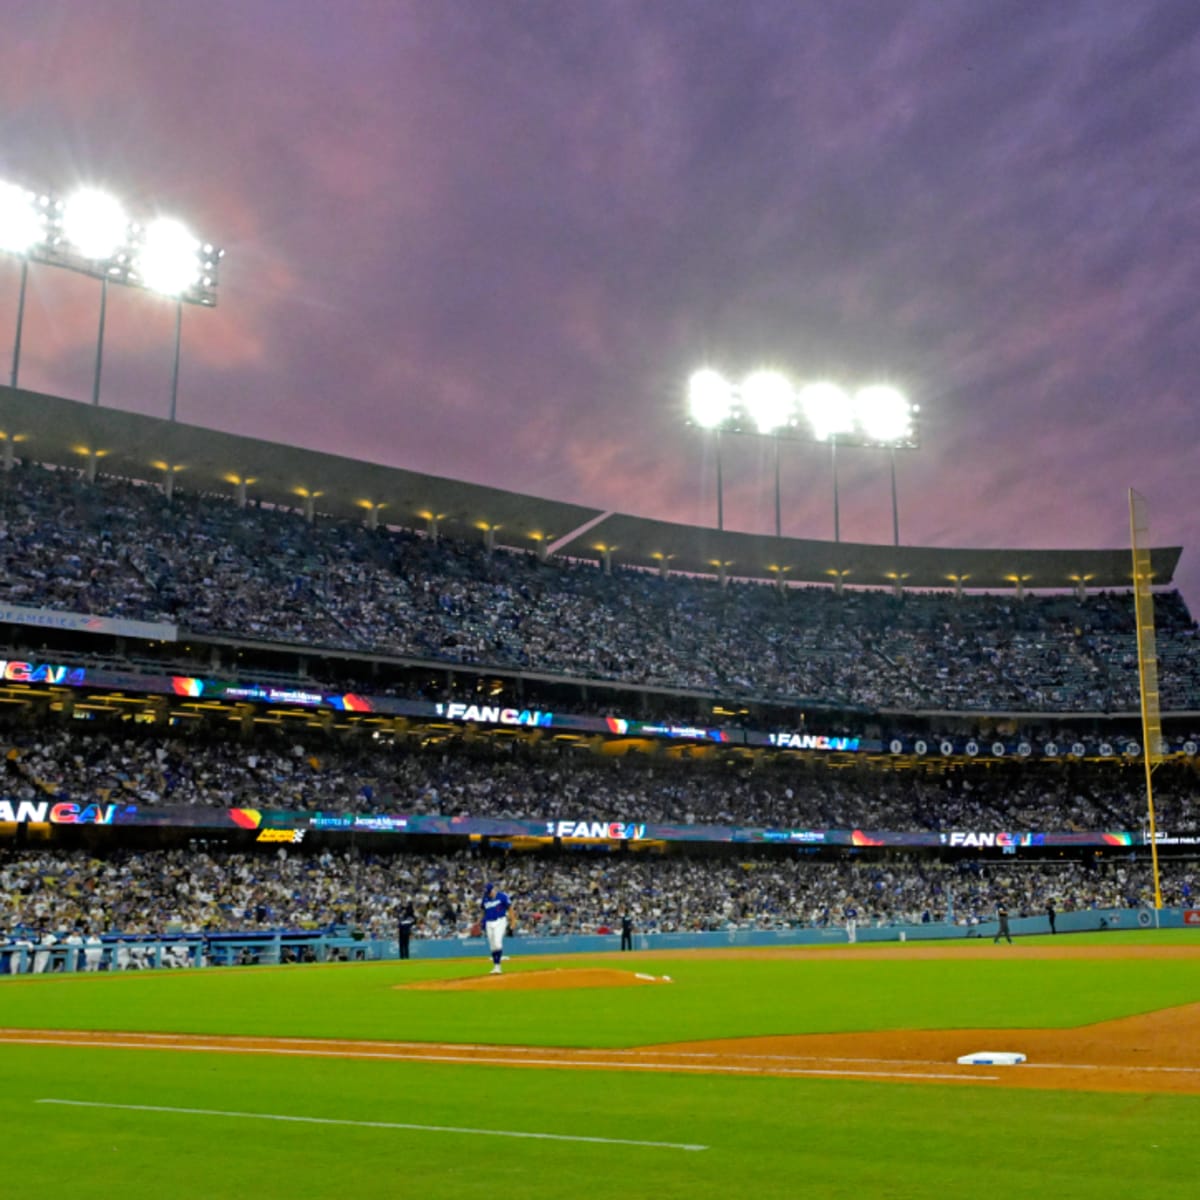 Dodger Stadium Flooded? That's News to the Los Angeles Dodgers